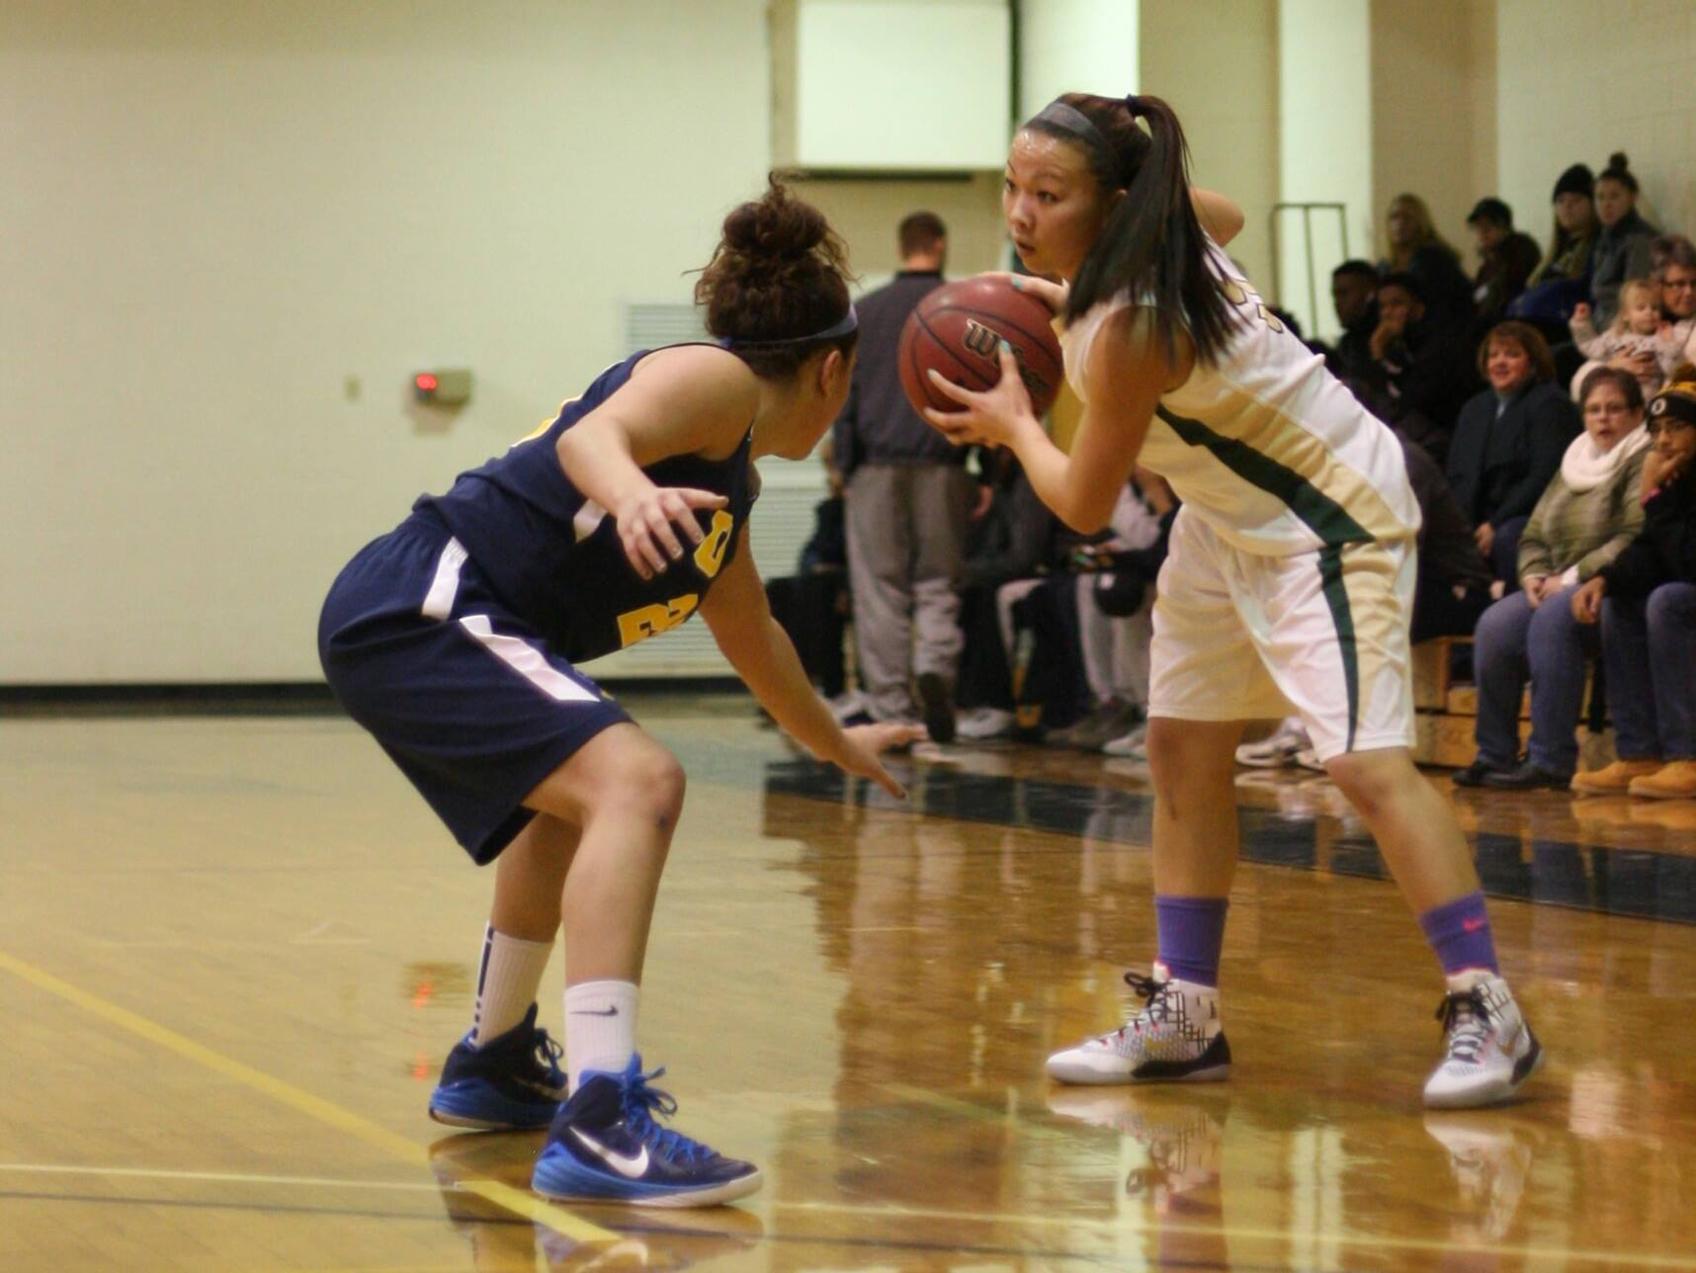 Colonials Surge Past Women's Basketball in Hat City Opener